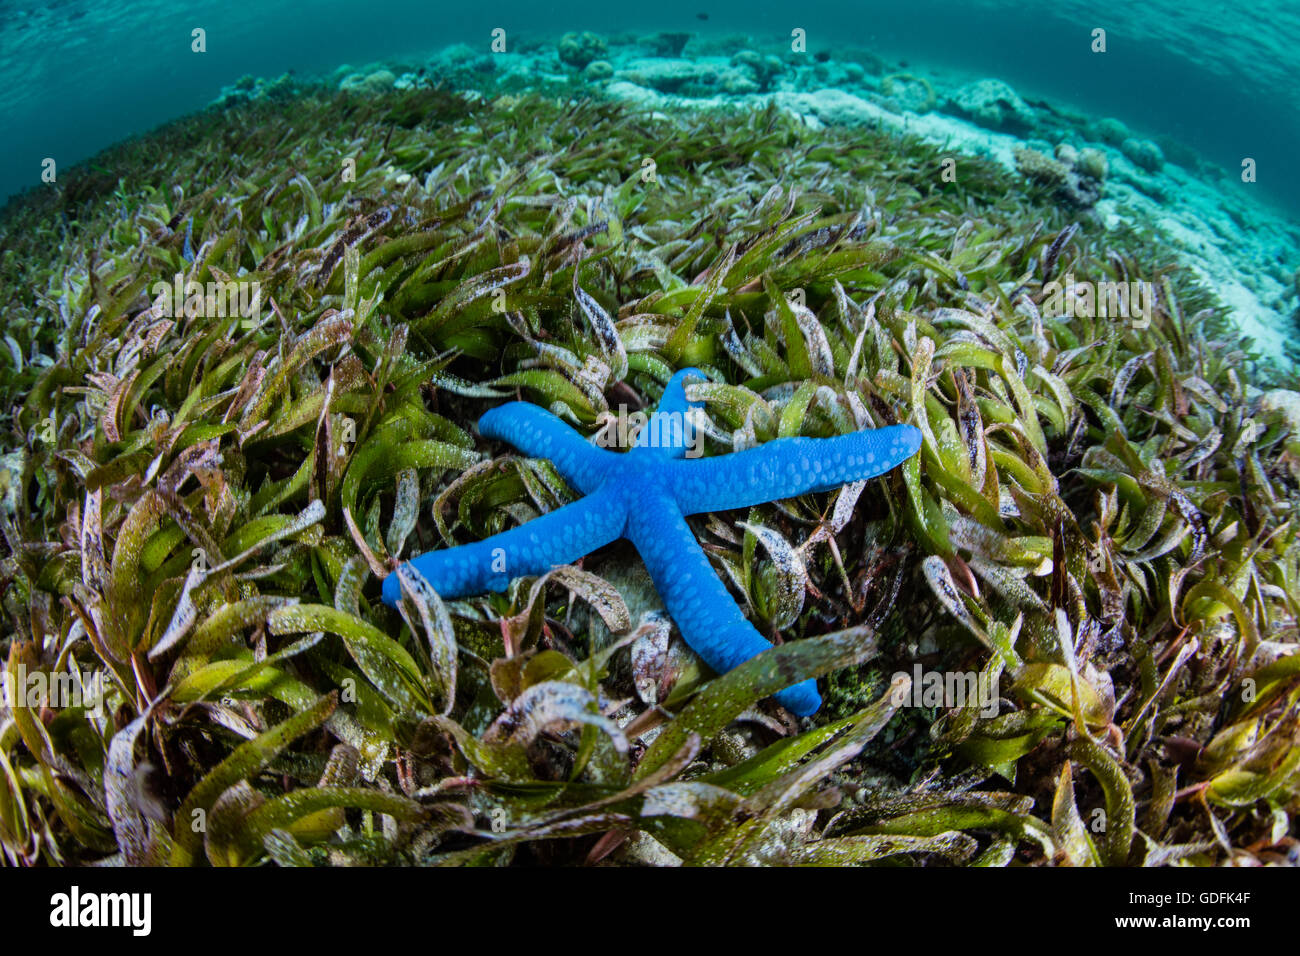 A Blue sea star (Linkia laevigata) lays on a seagrass meadow in Indonesia. This echinoderm is found throughout the Indo-Pacific. Stock Photo